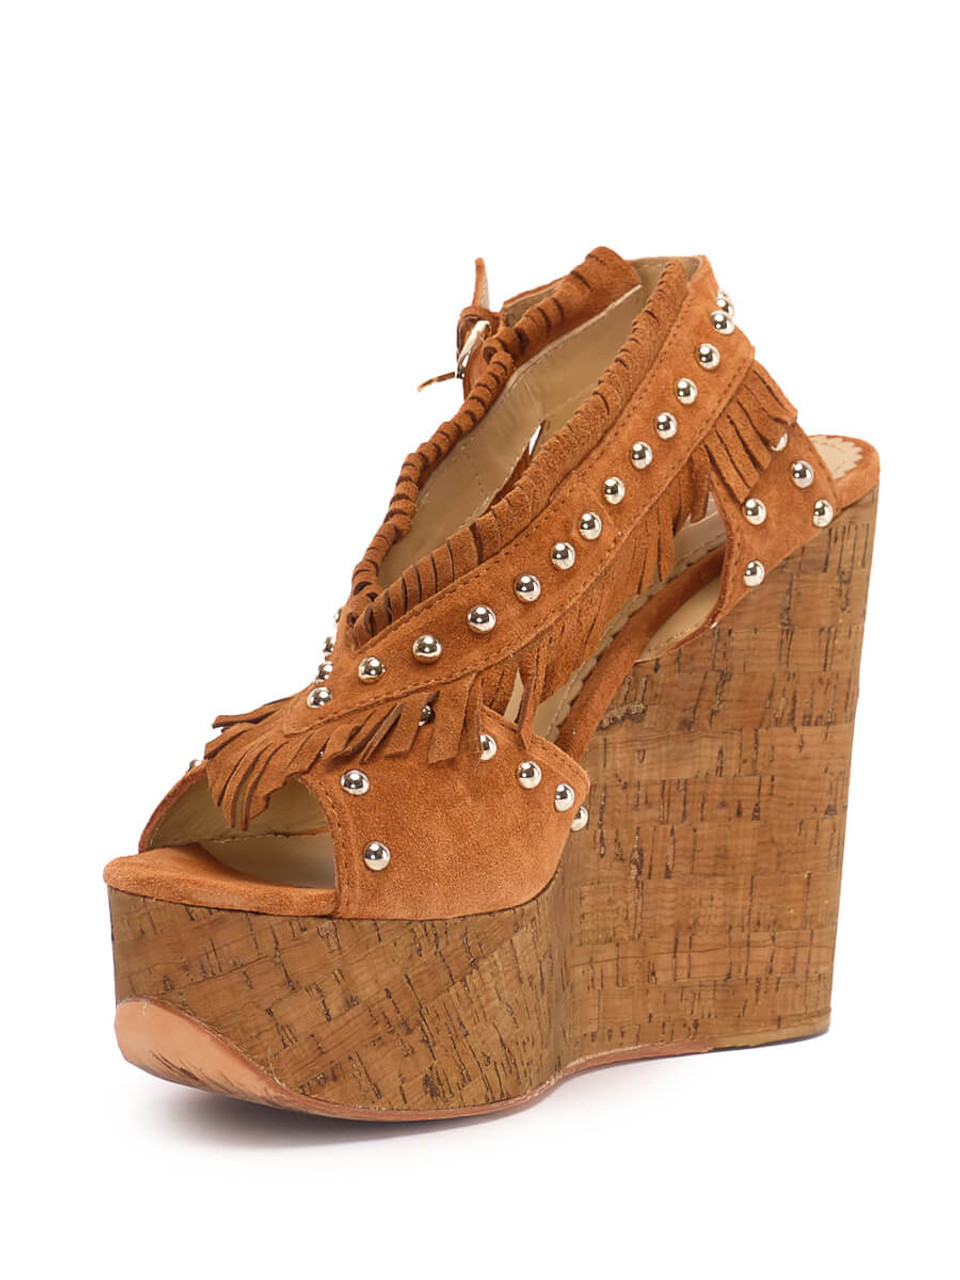 Women Ash Blossom Wedges -  Brown Size 39 US 9